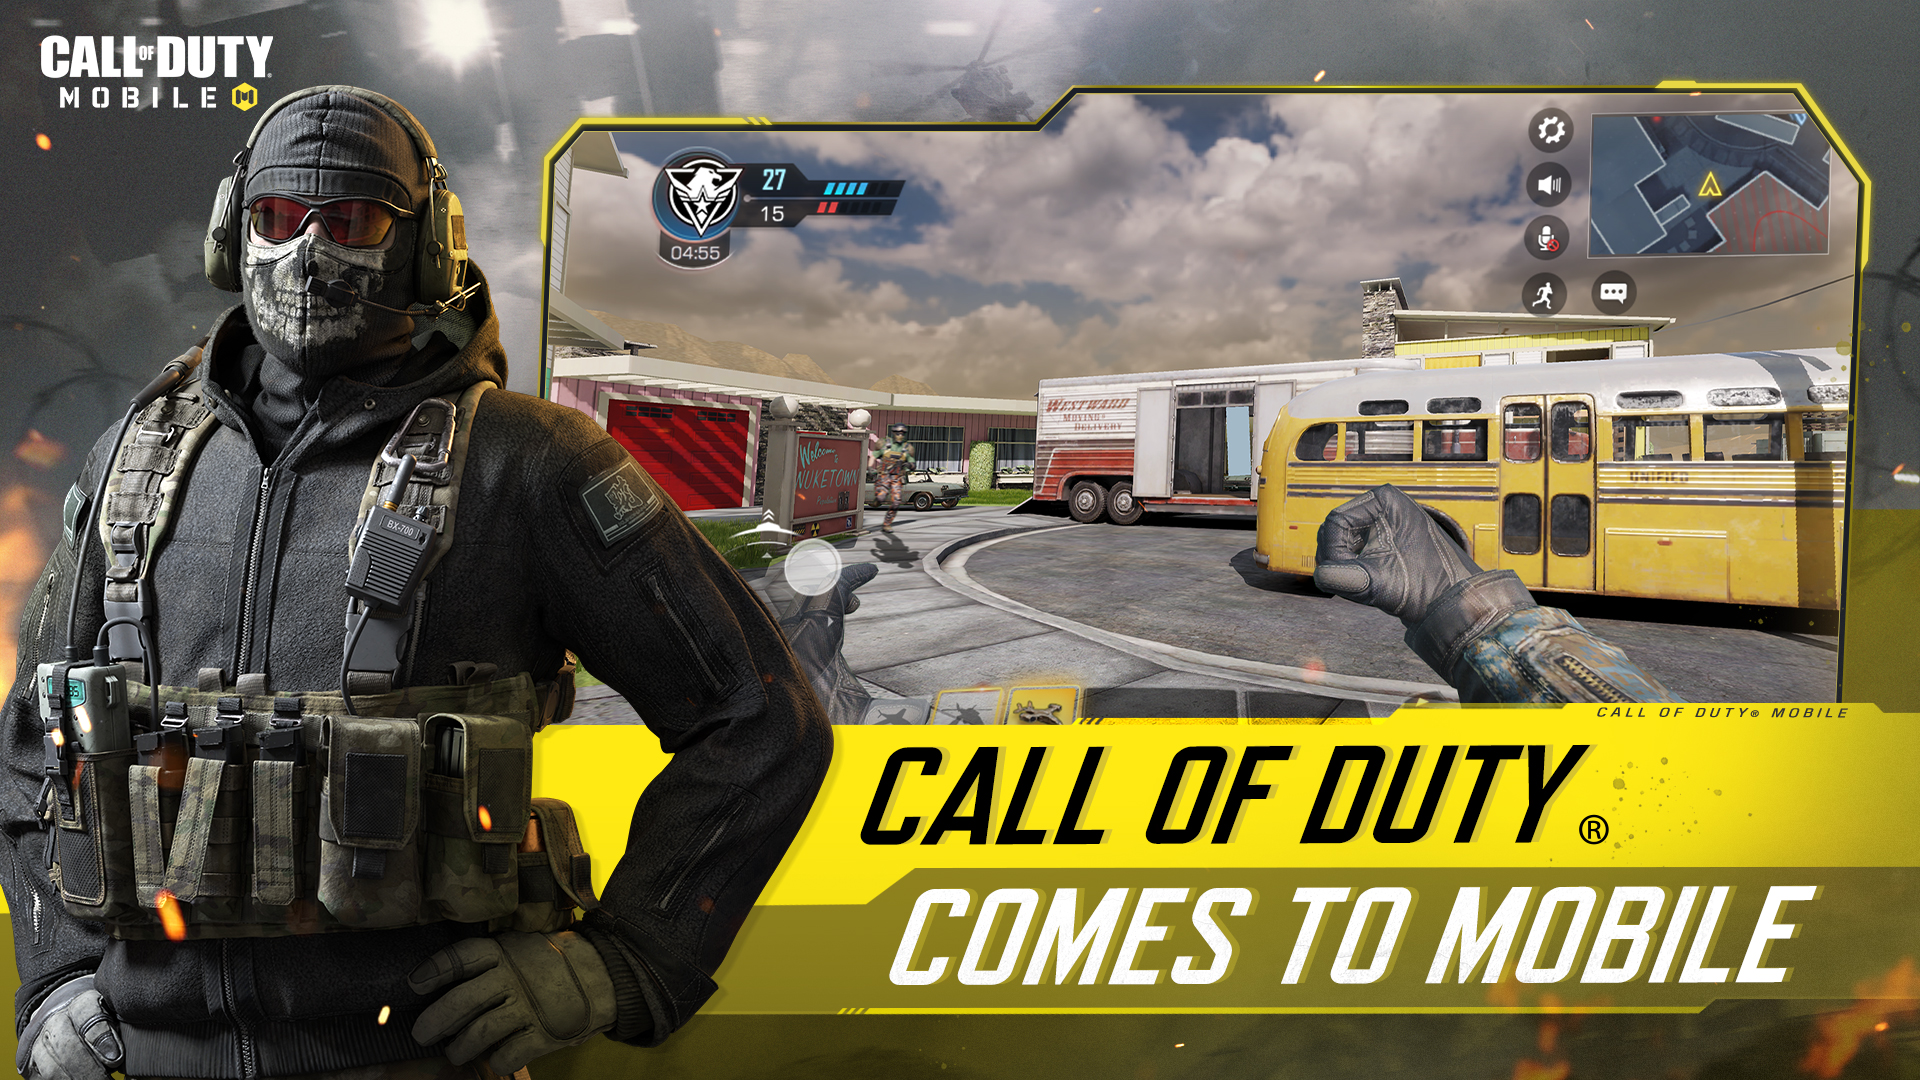 Call Of Duty Mobile Apk 1 0 19 Download For Android Download Call Of Duty Mobile Xapk Apk Obb Data Latest Version Apkfab Com